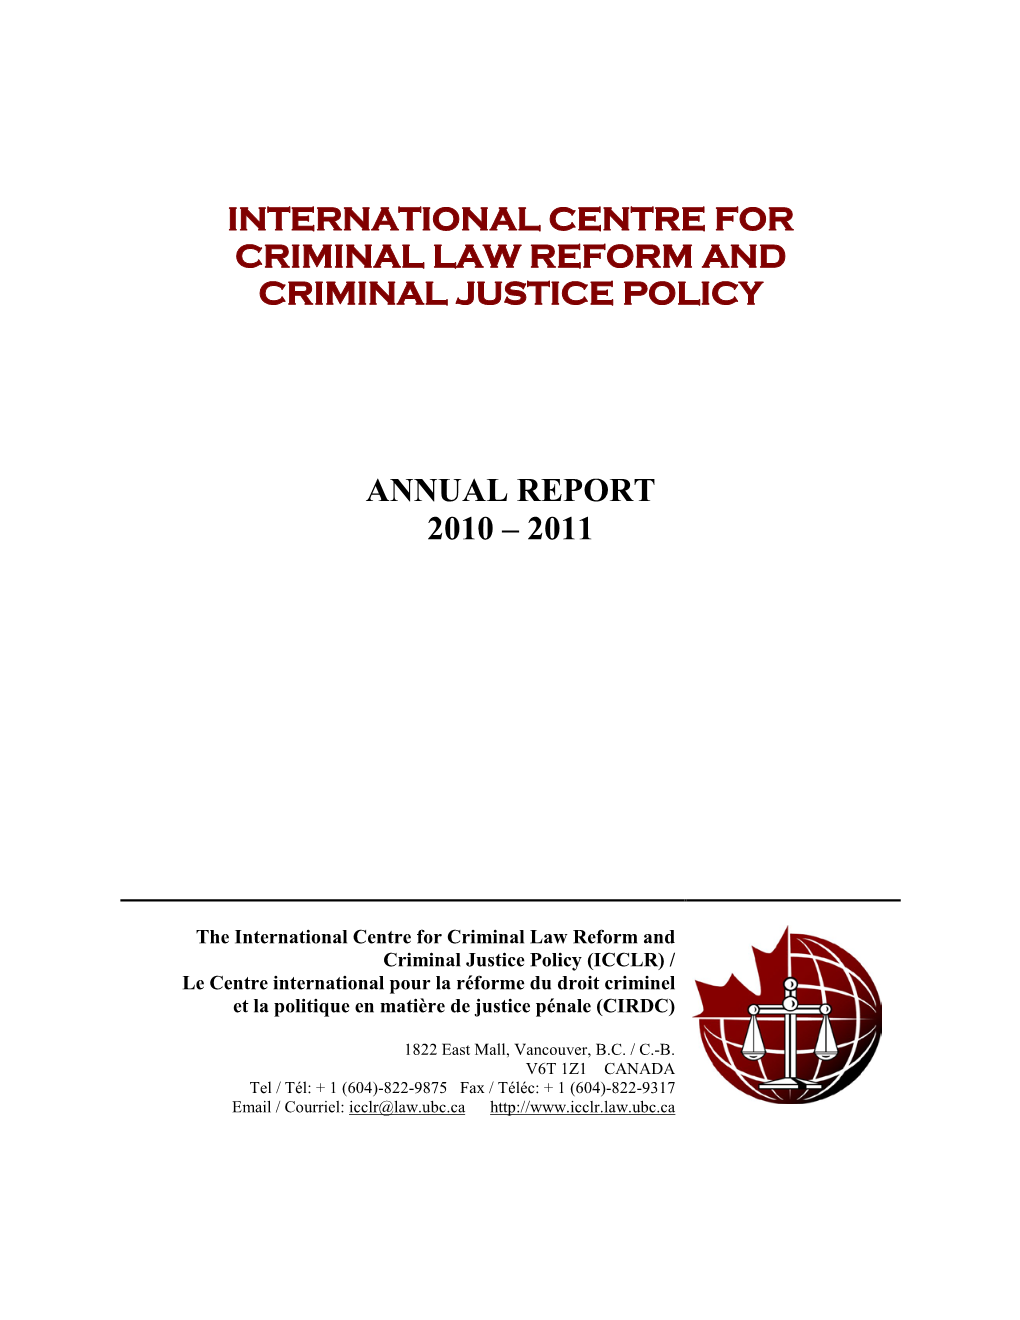 International Centre for Criminal Law Reform and Criminal Justice Policy